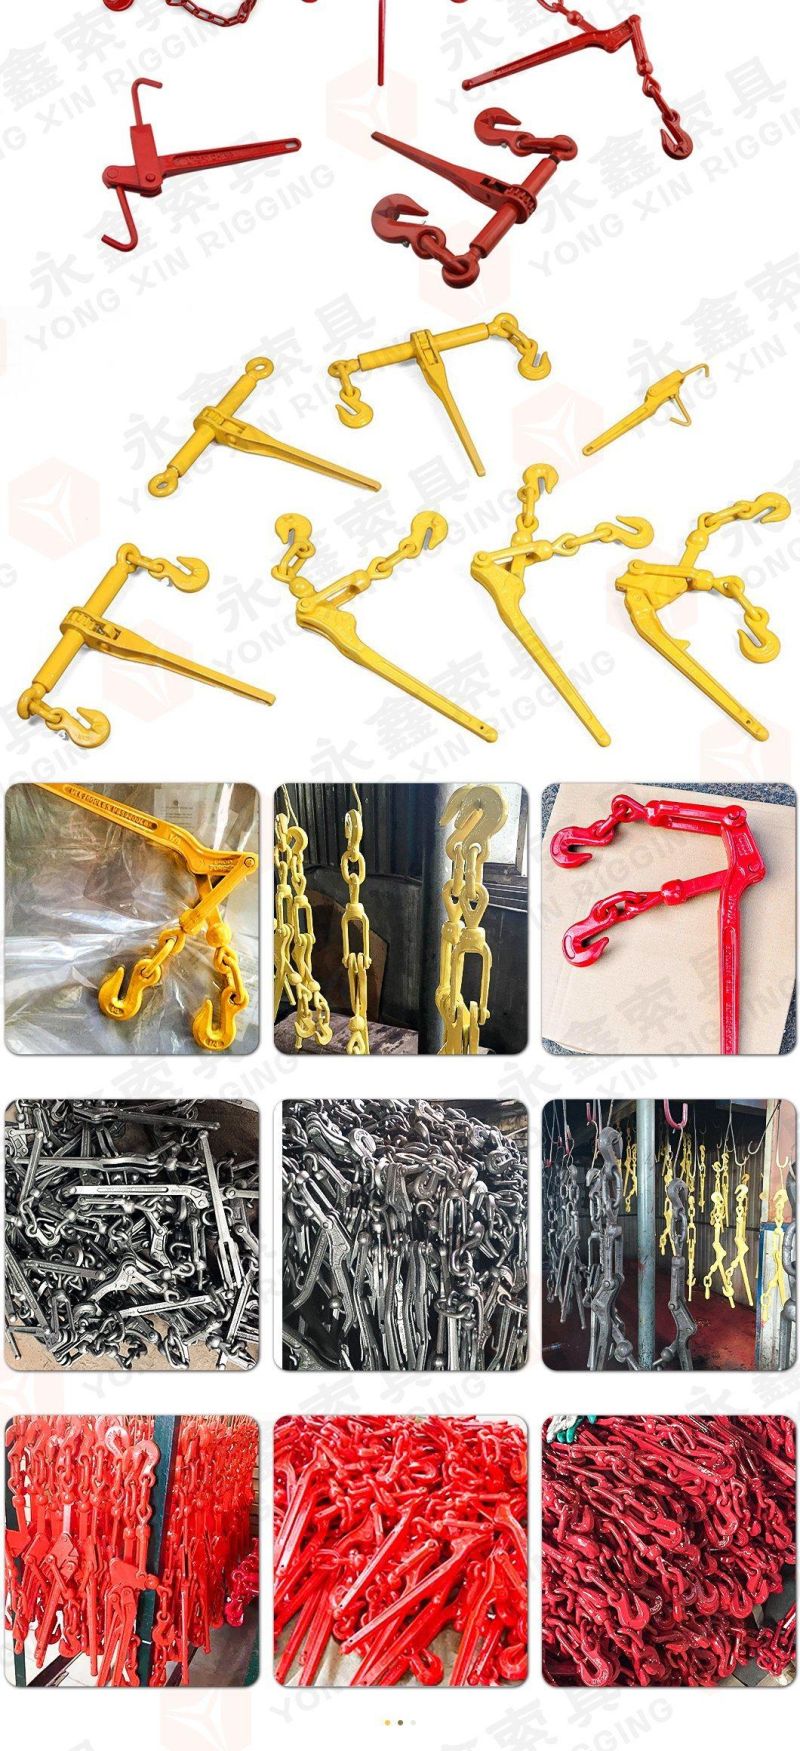 Type Lever Load Binders China Rigging Hardware Chain Type Lever Load Binders with Hooks